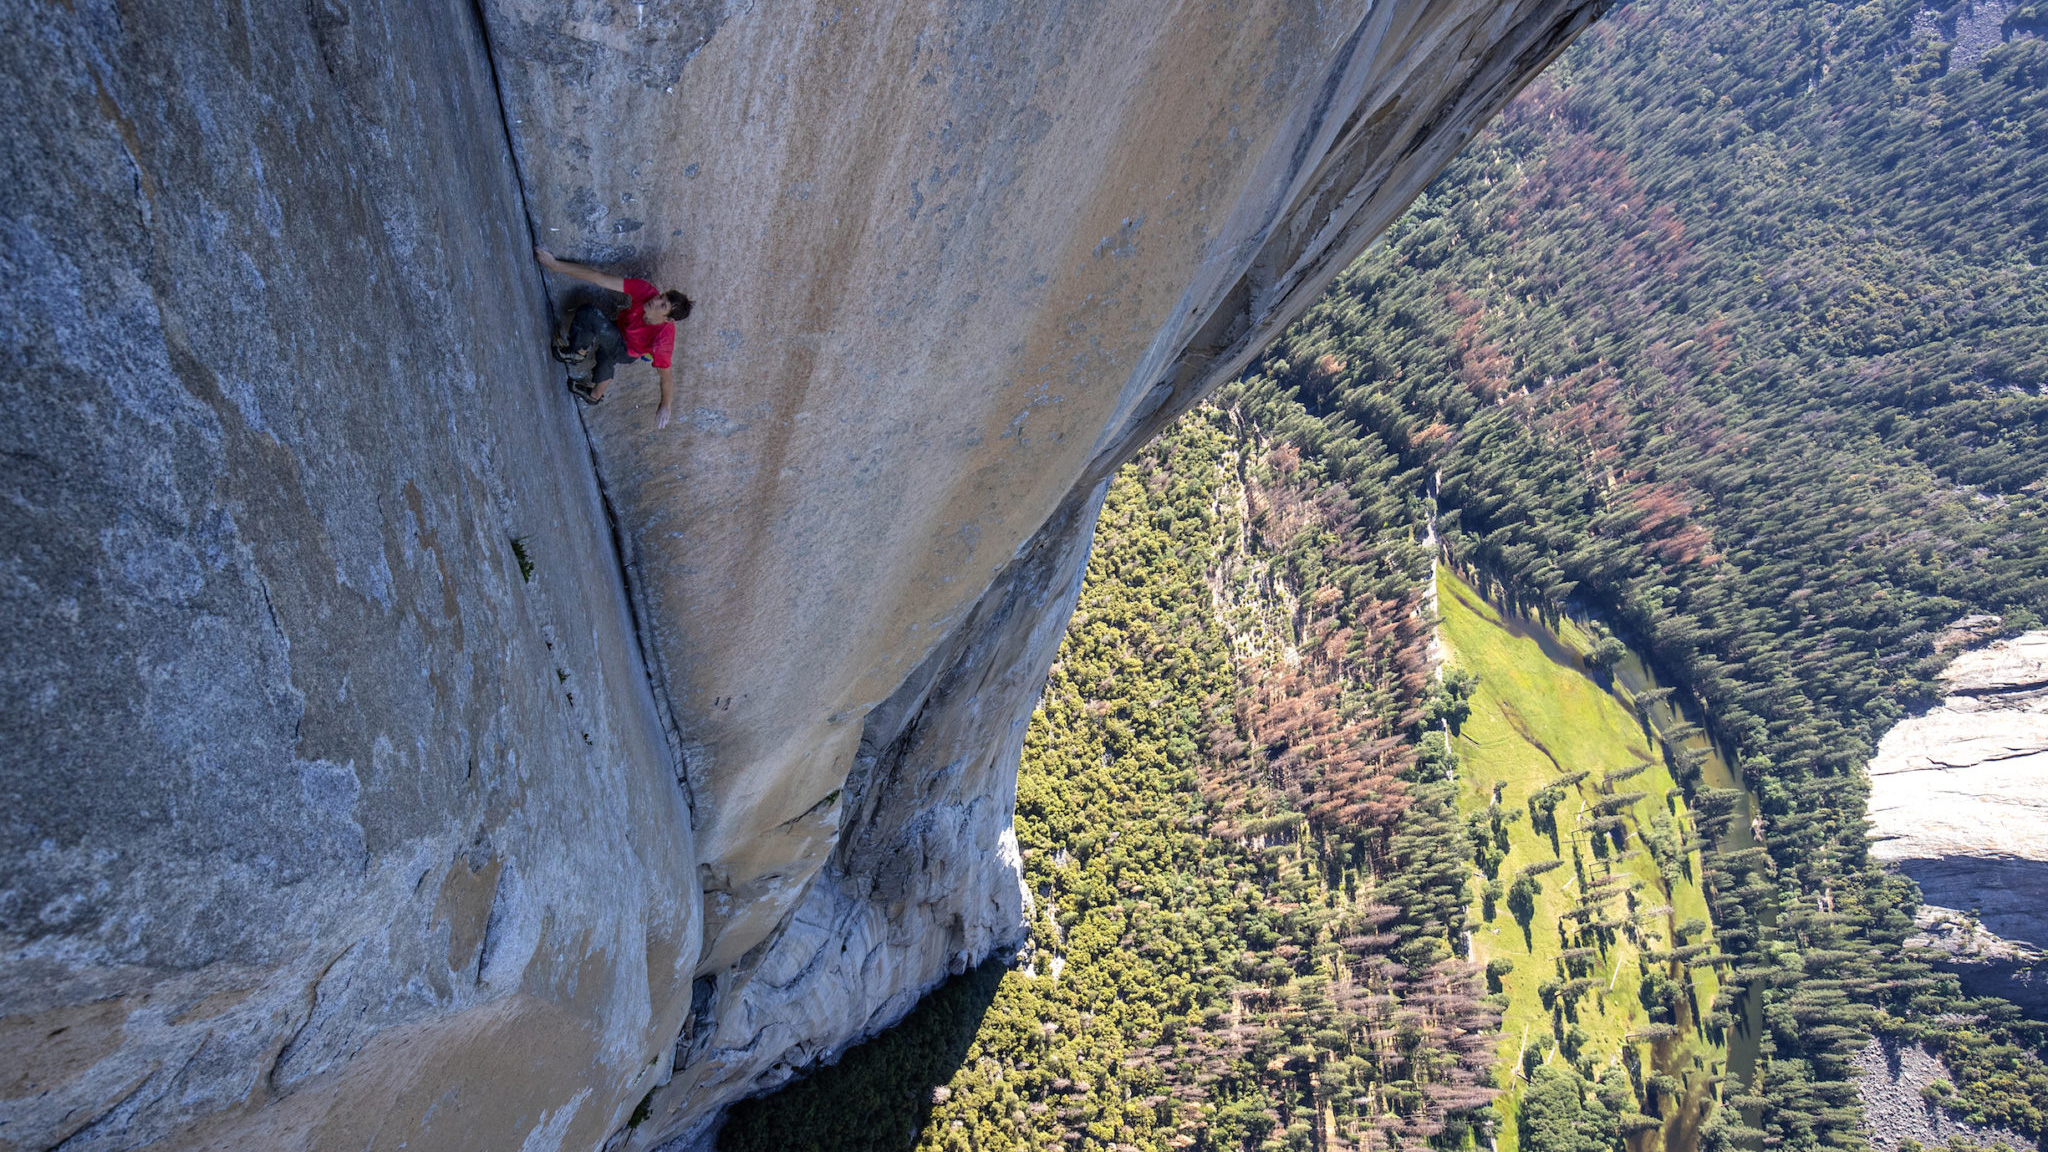 Free Solo Co Director And DP Jimmy Chin On The Risks